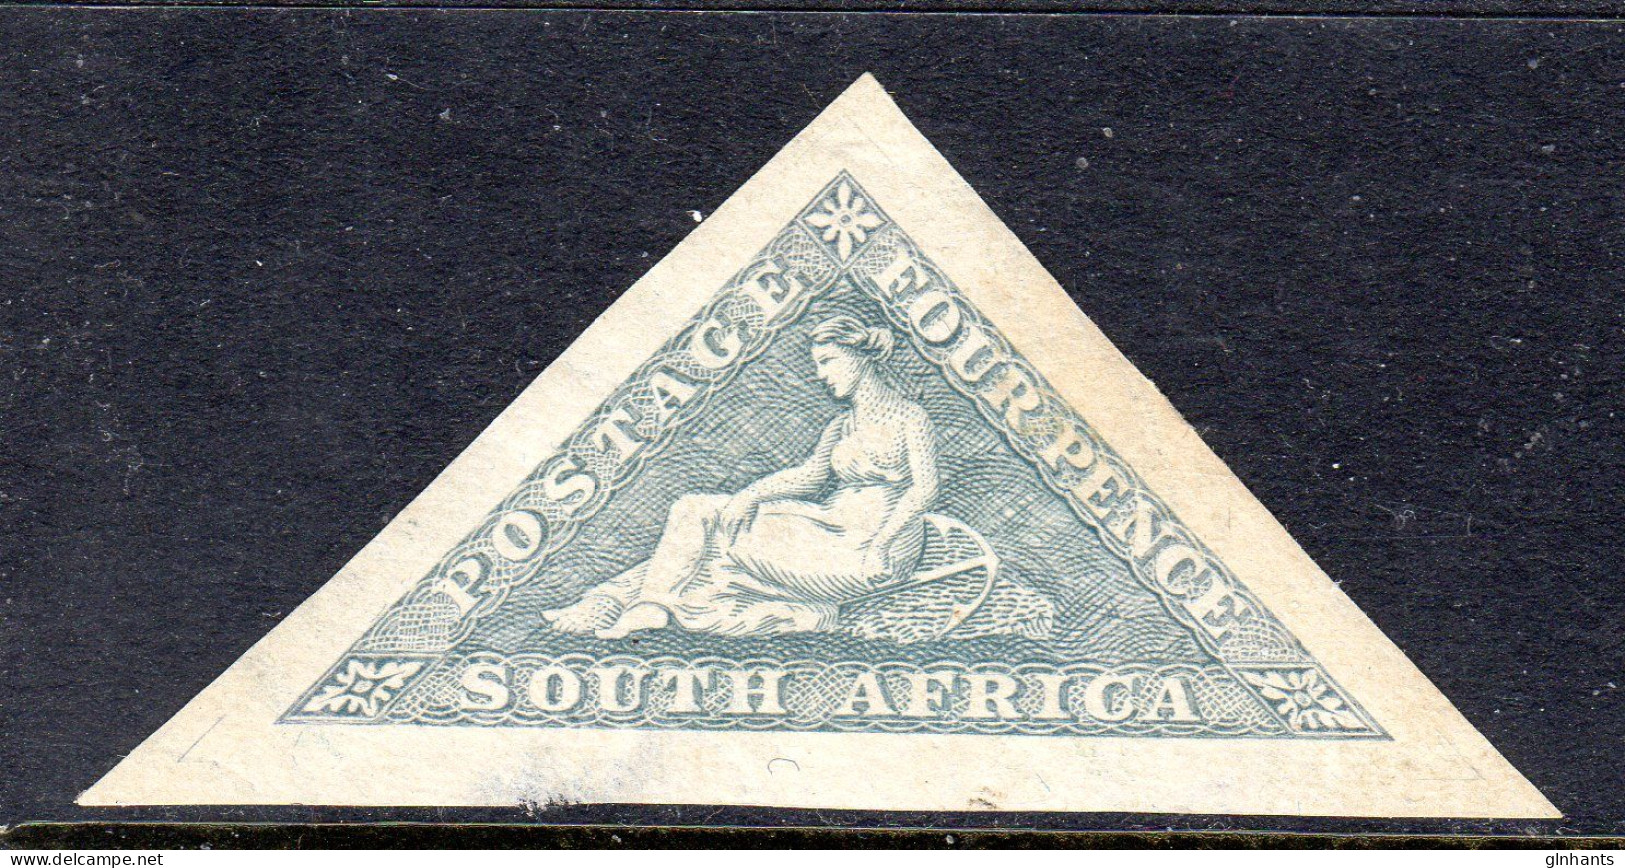 SOUTH AFRICA - 1926 HOPE 4d STAMP ENGLISH FINE  MOUNTED MINT MM * SG 33 - Neufs